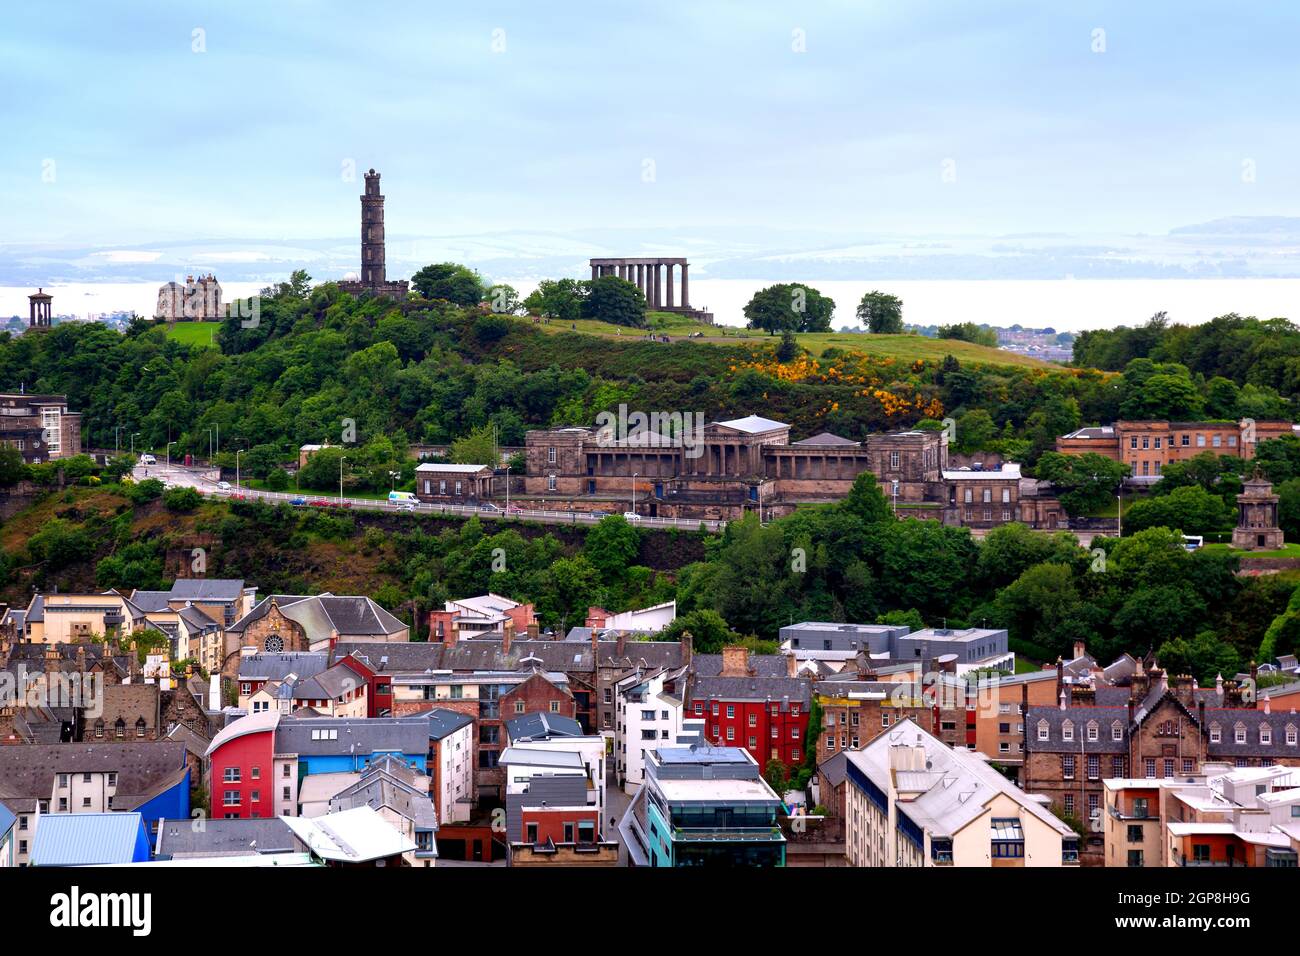 View on Calton Hill and Old Royal High School (also known as New Parliament House) from Holyrood Park, Edinburgh, Scotland, UK Stock Photo